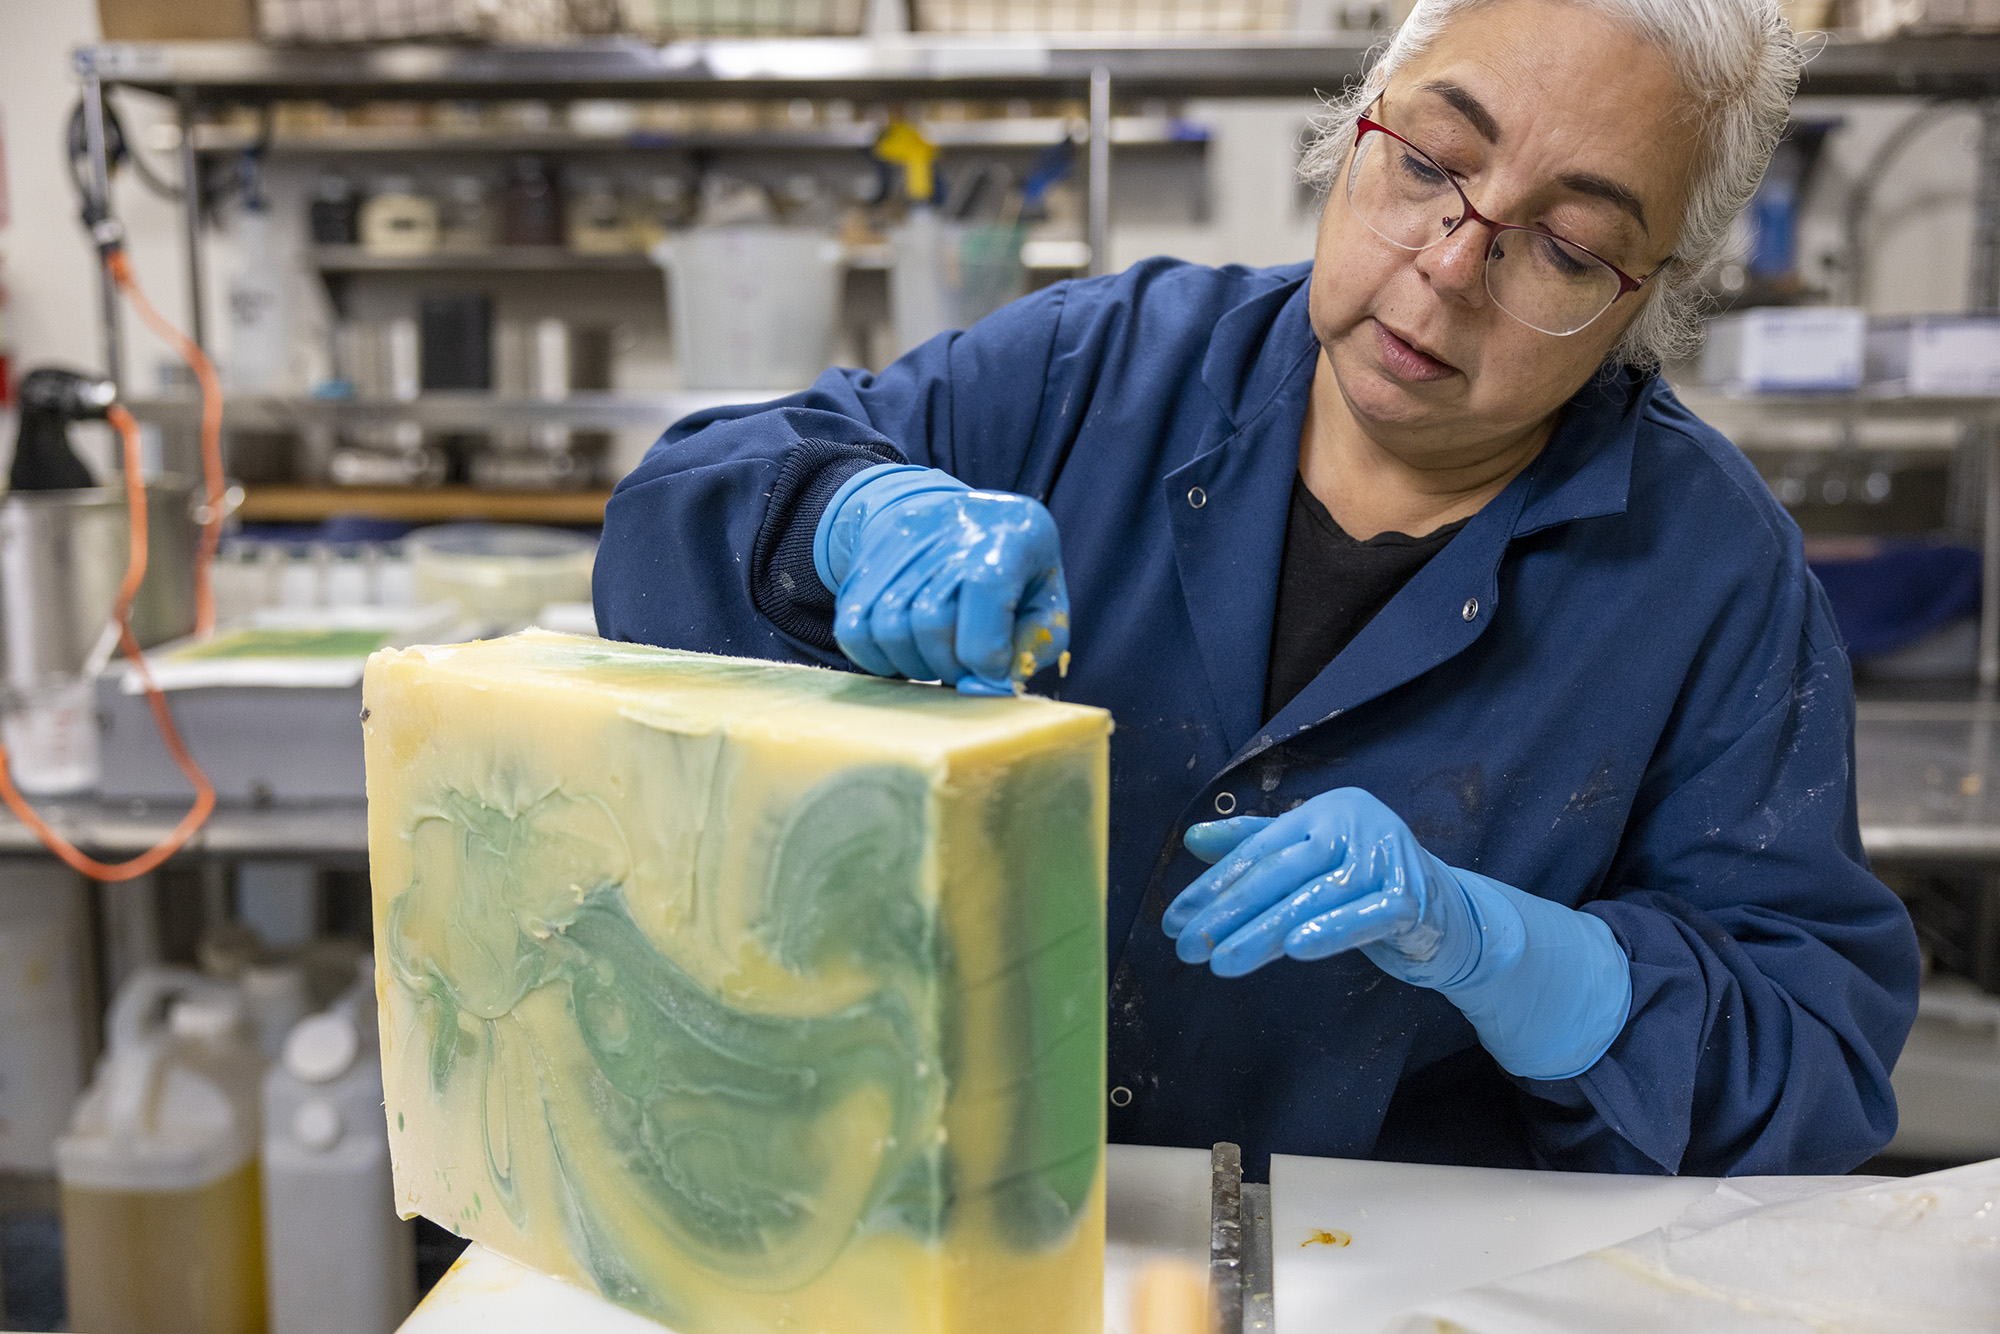 Owner and founder of Soap Cauldron, Emma Mann, preparing large block of soap for cutting.